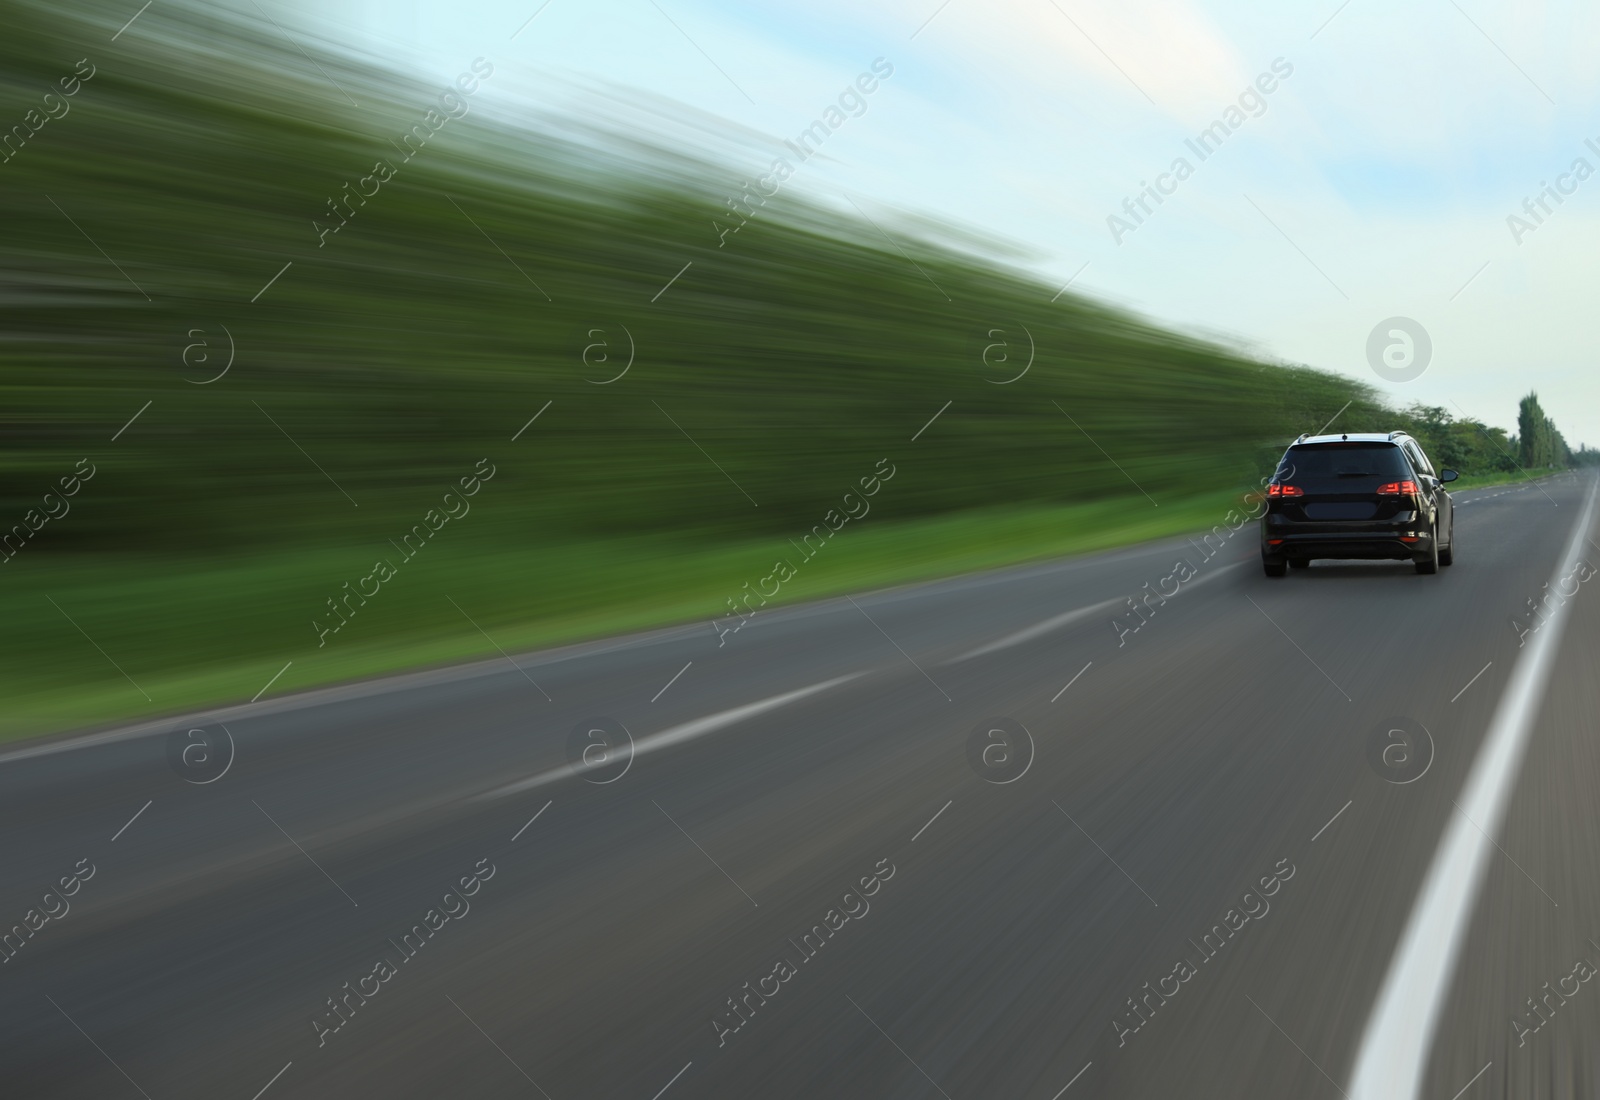 Image of Black car driving at high speed on asphalt road outdoors, motion blur effect